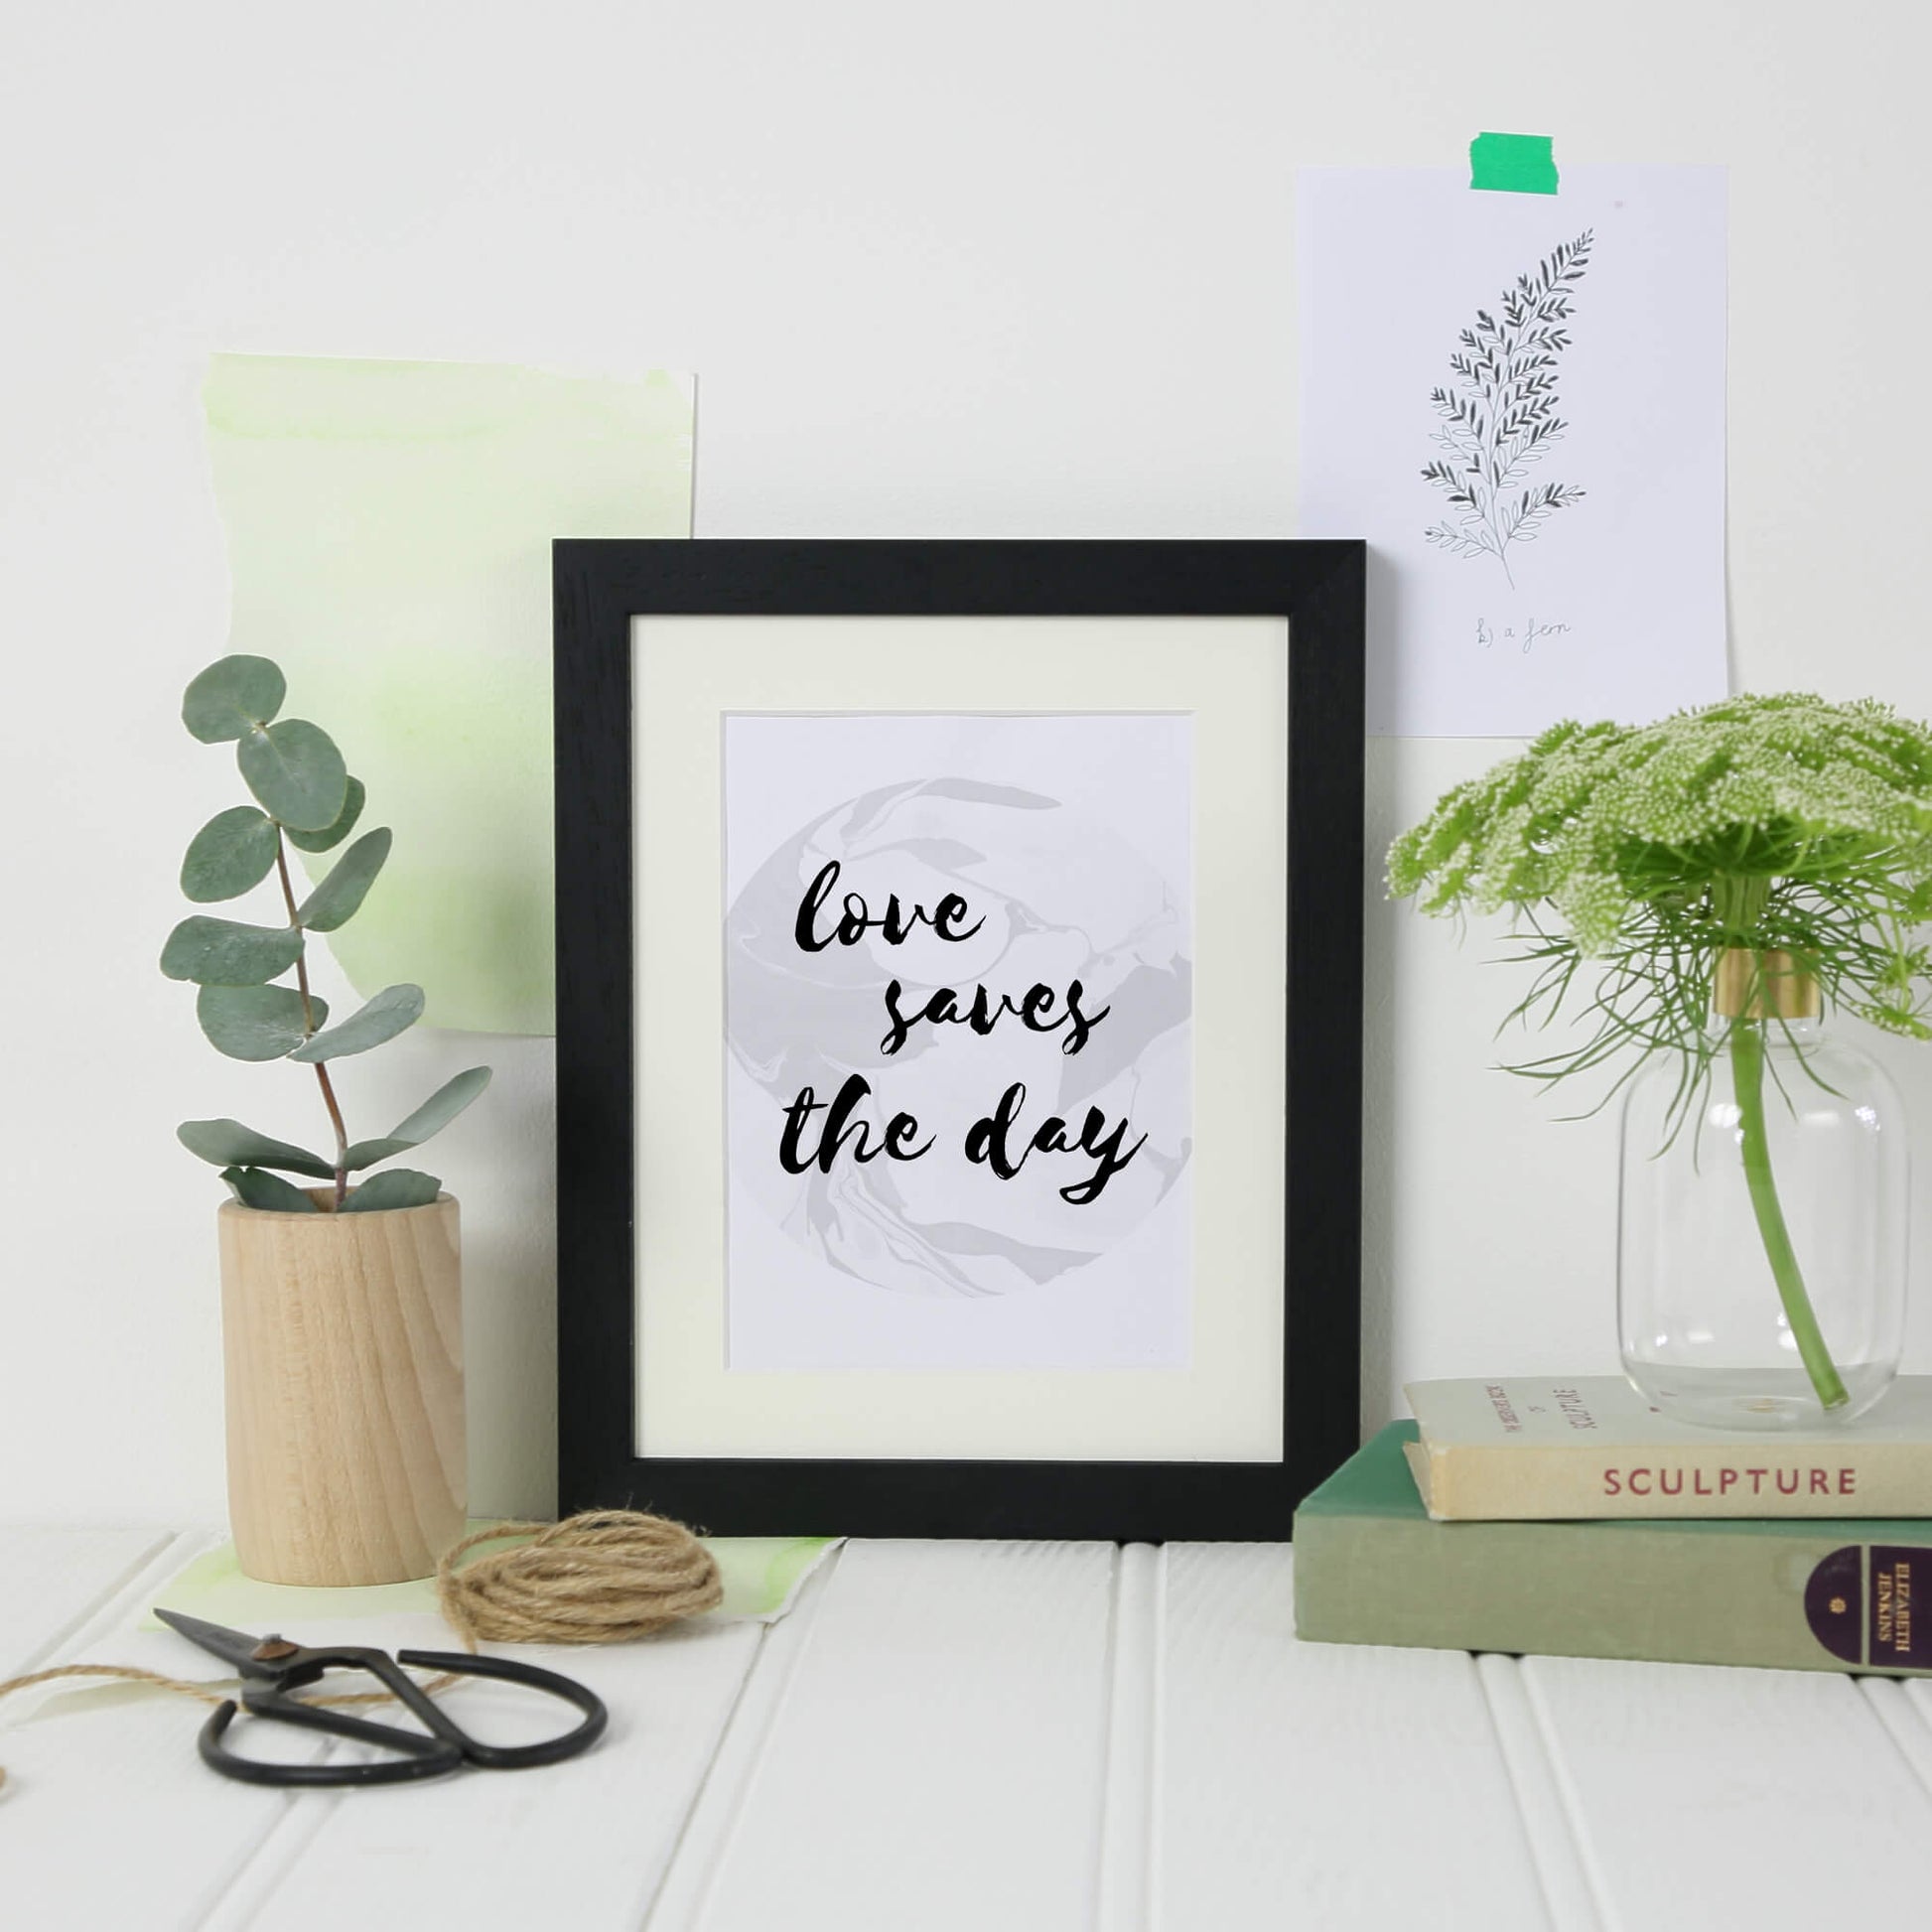 Love Saves The Day Wall Print by SixElevenCreations. Product Code SEP0310